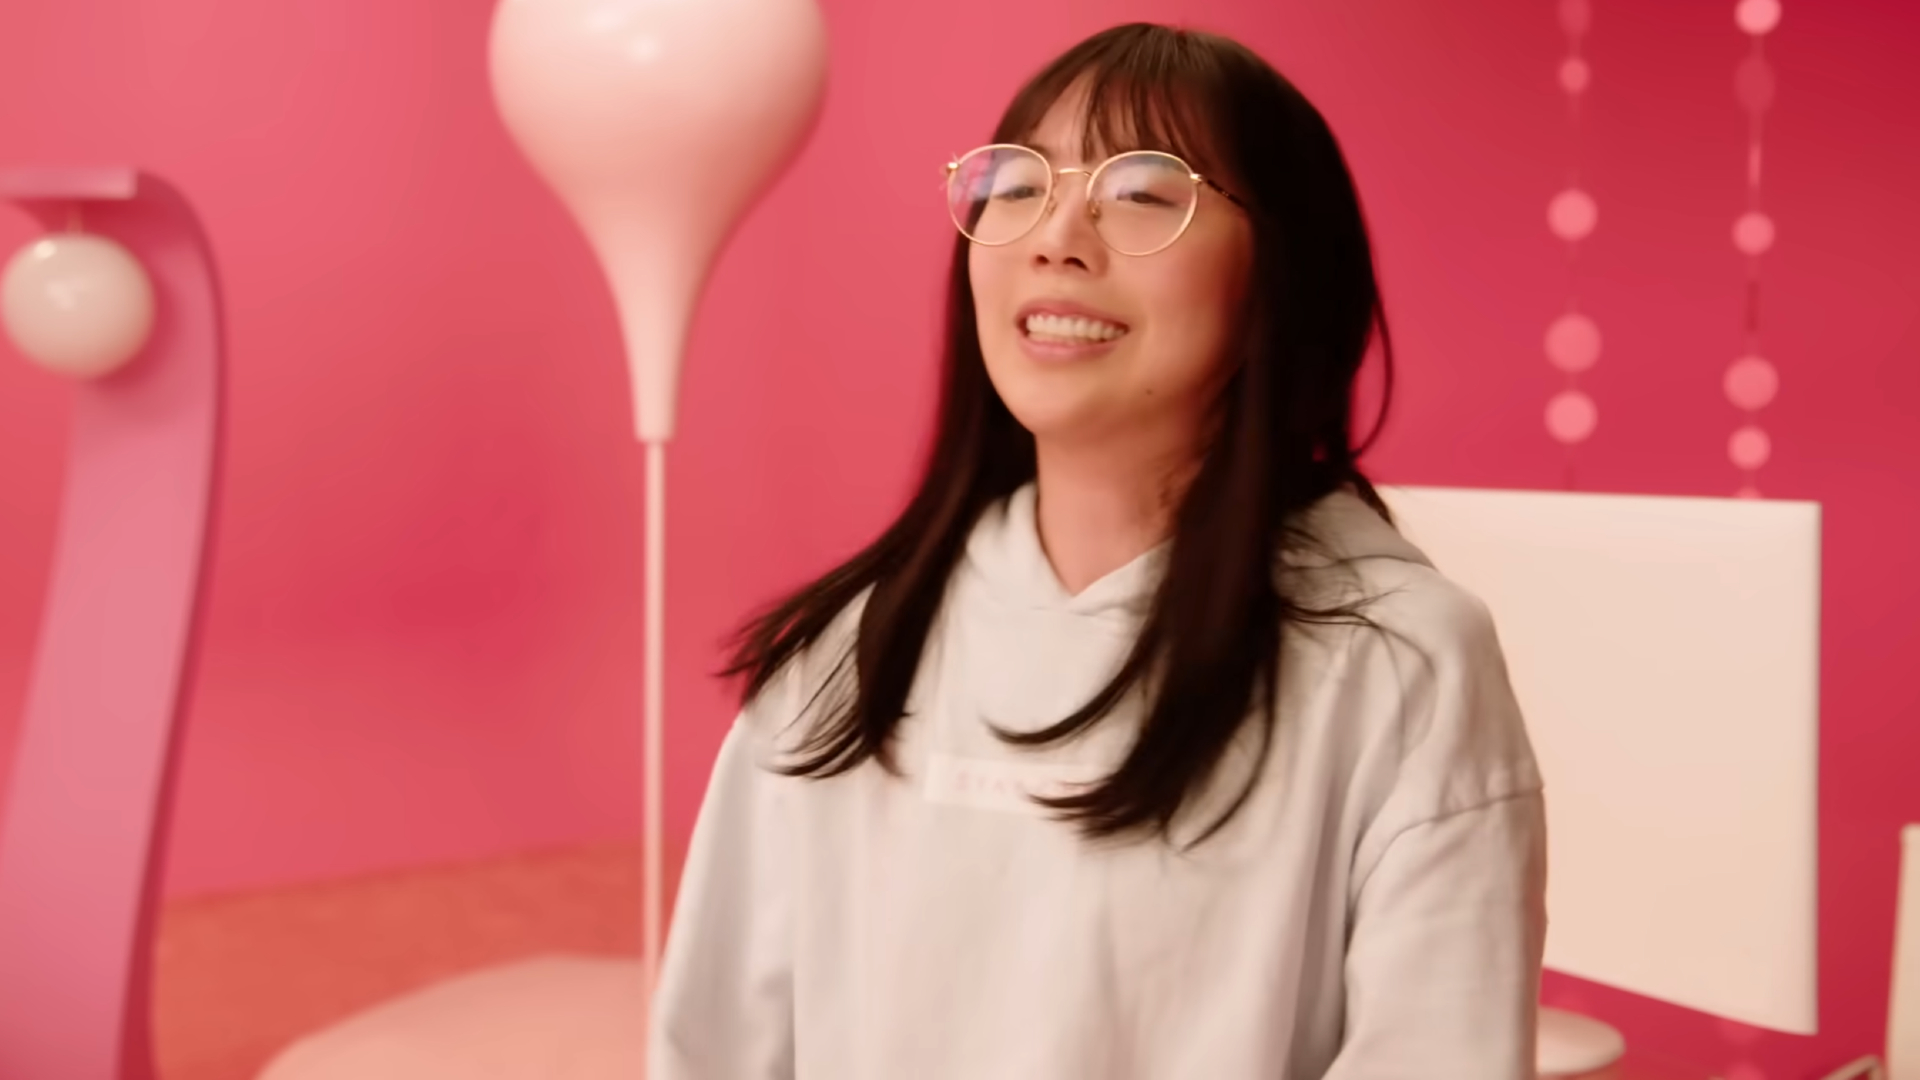 LilyPichu in a pinkish-red room in her 